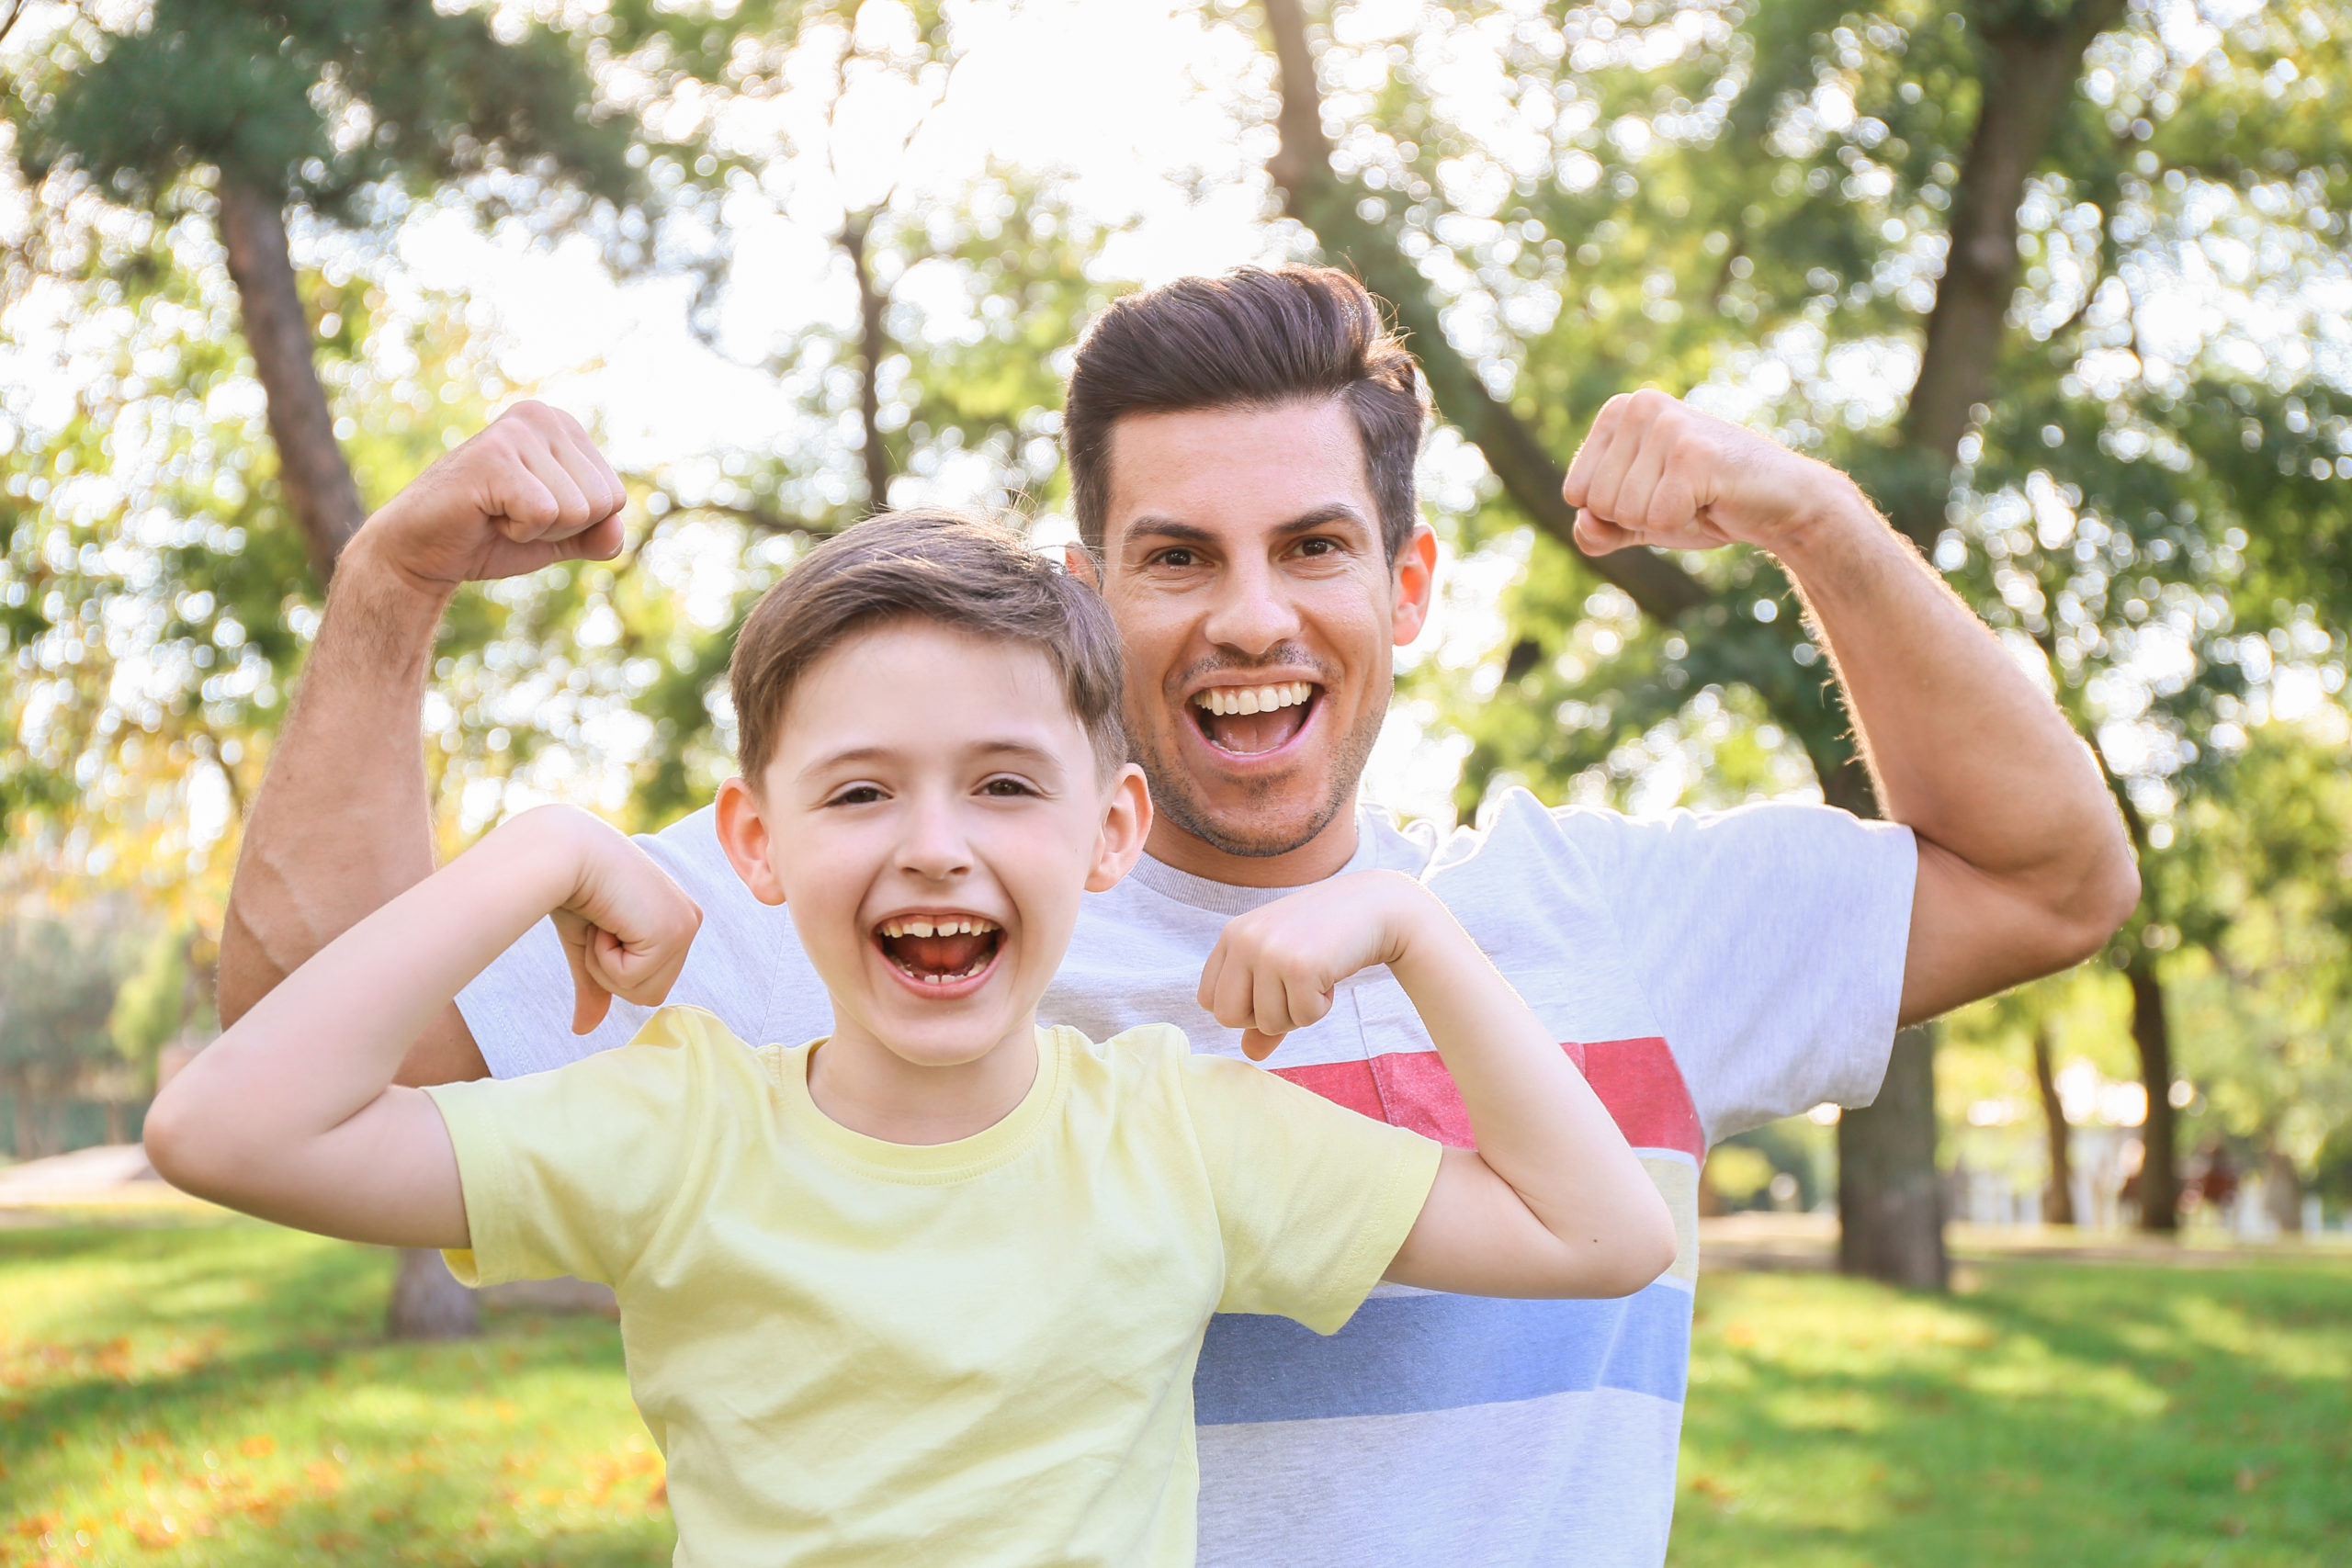 Safe Haven Sunday helps families stay strong in the fight against unsavory internet sites. In this picture, a father and son 'show off their muscles'.